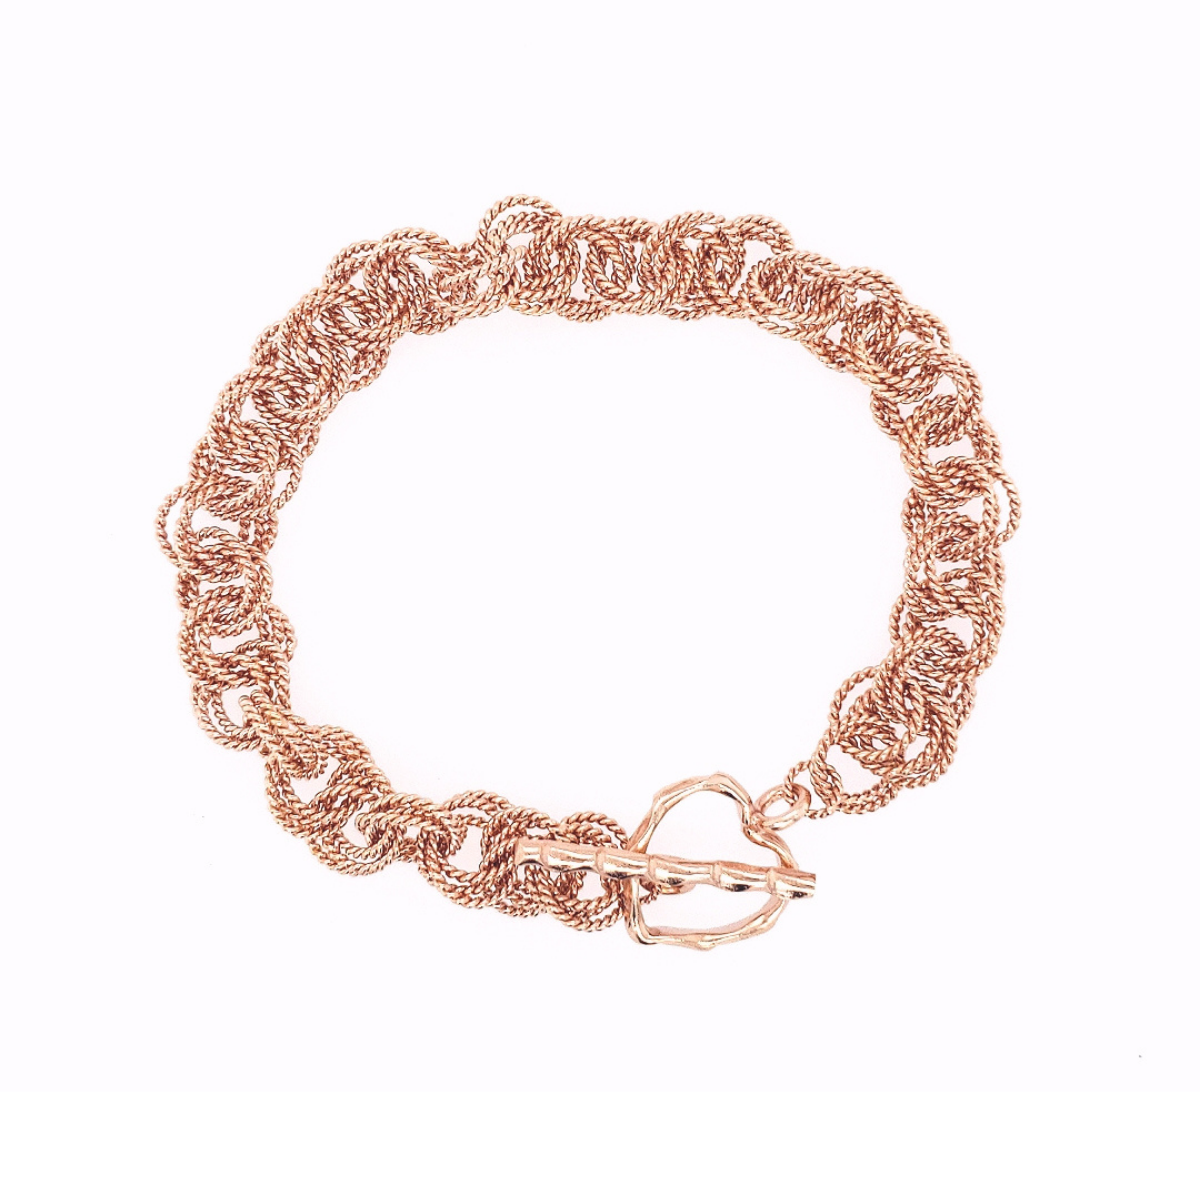 Arpaia Lang Rose Gold Vermeil Bracelet with Heart Clasp - Main image with white background using light box